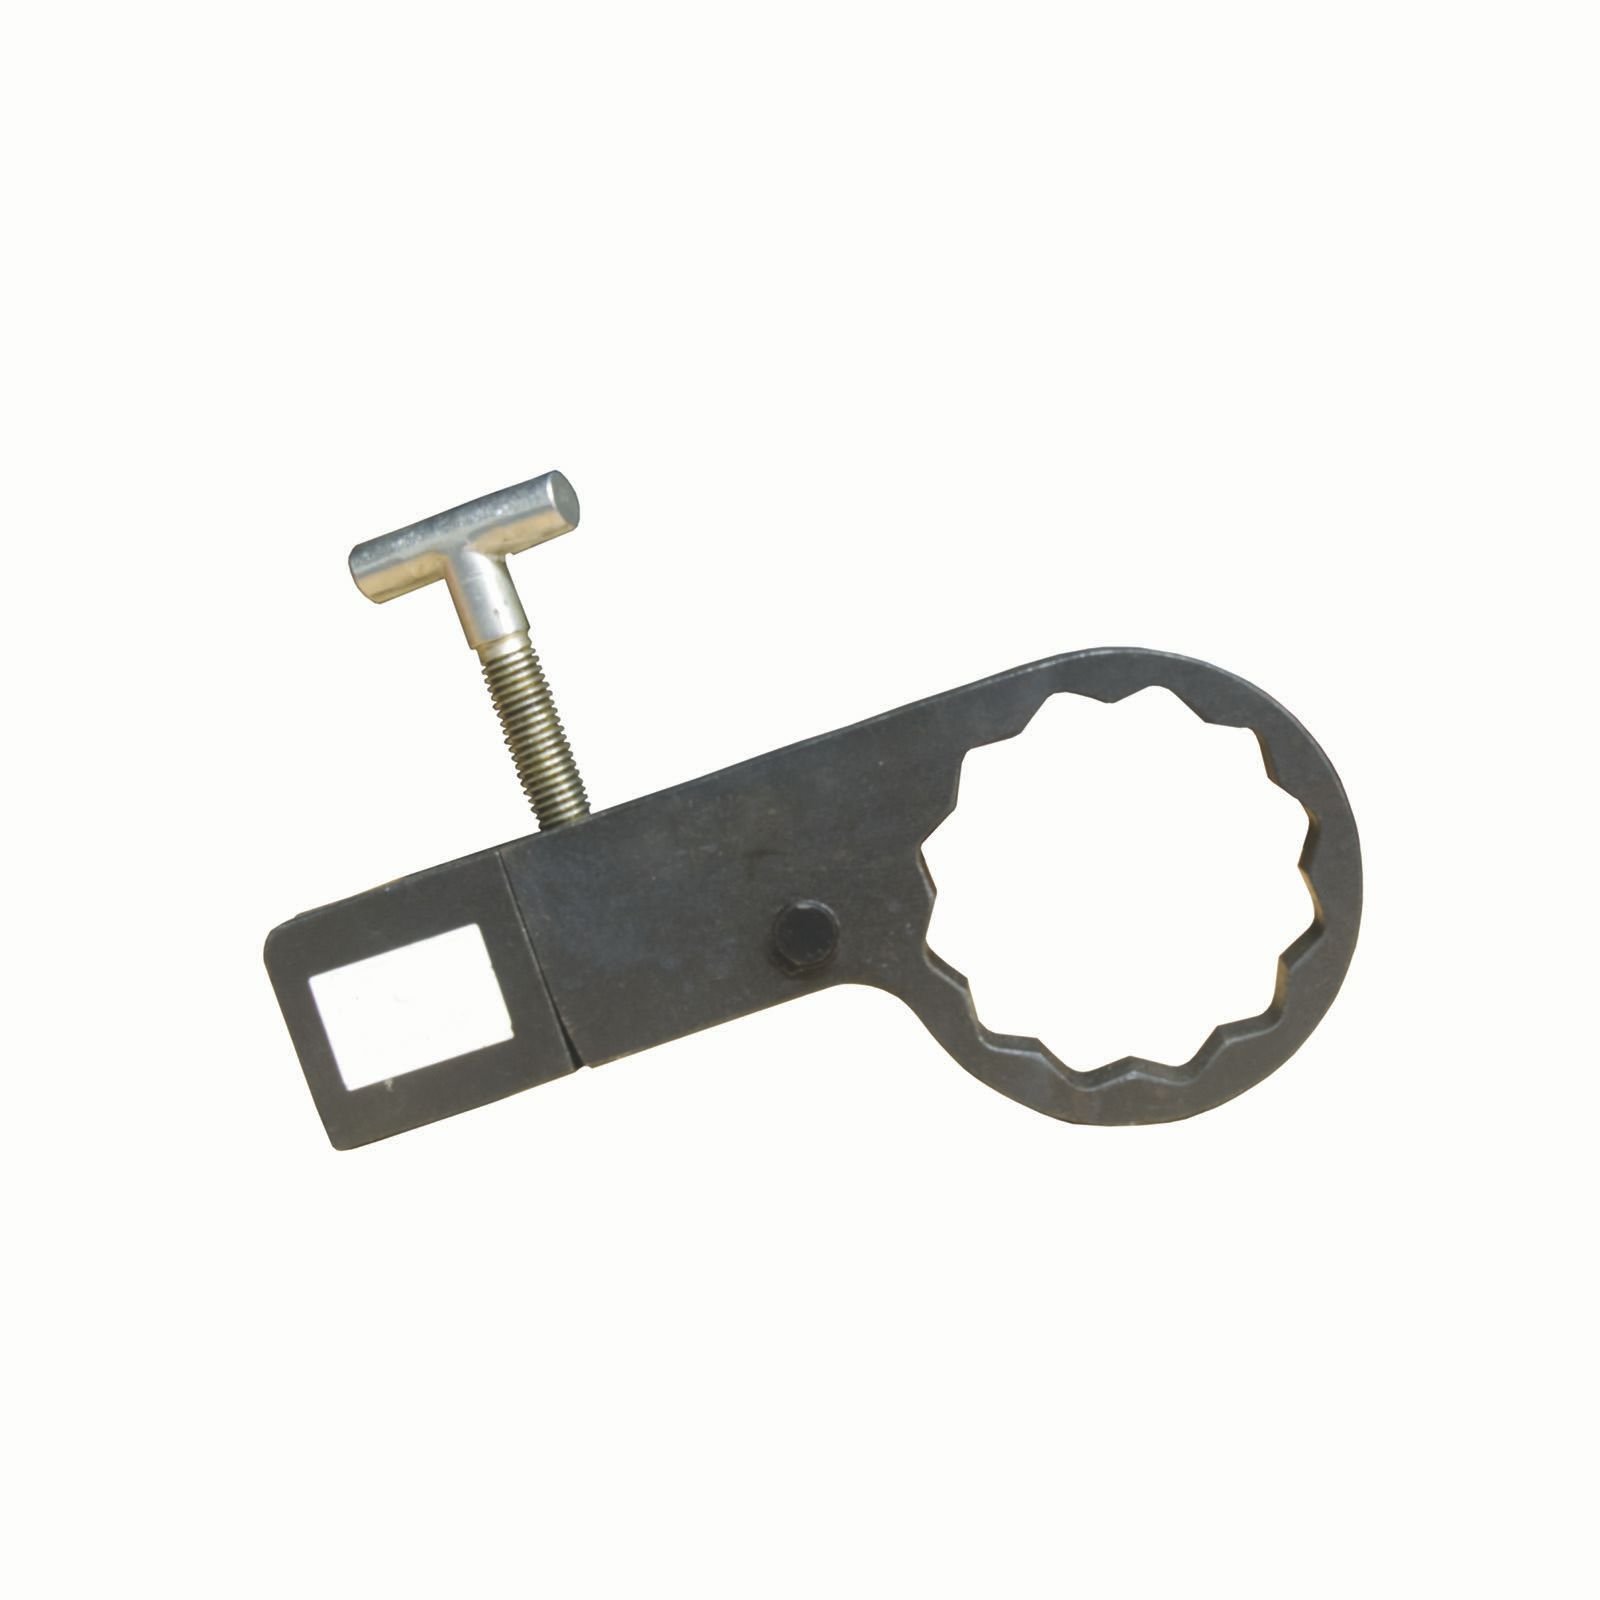 Back-Up Wrench     _BK-100 productfoto